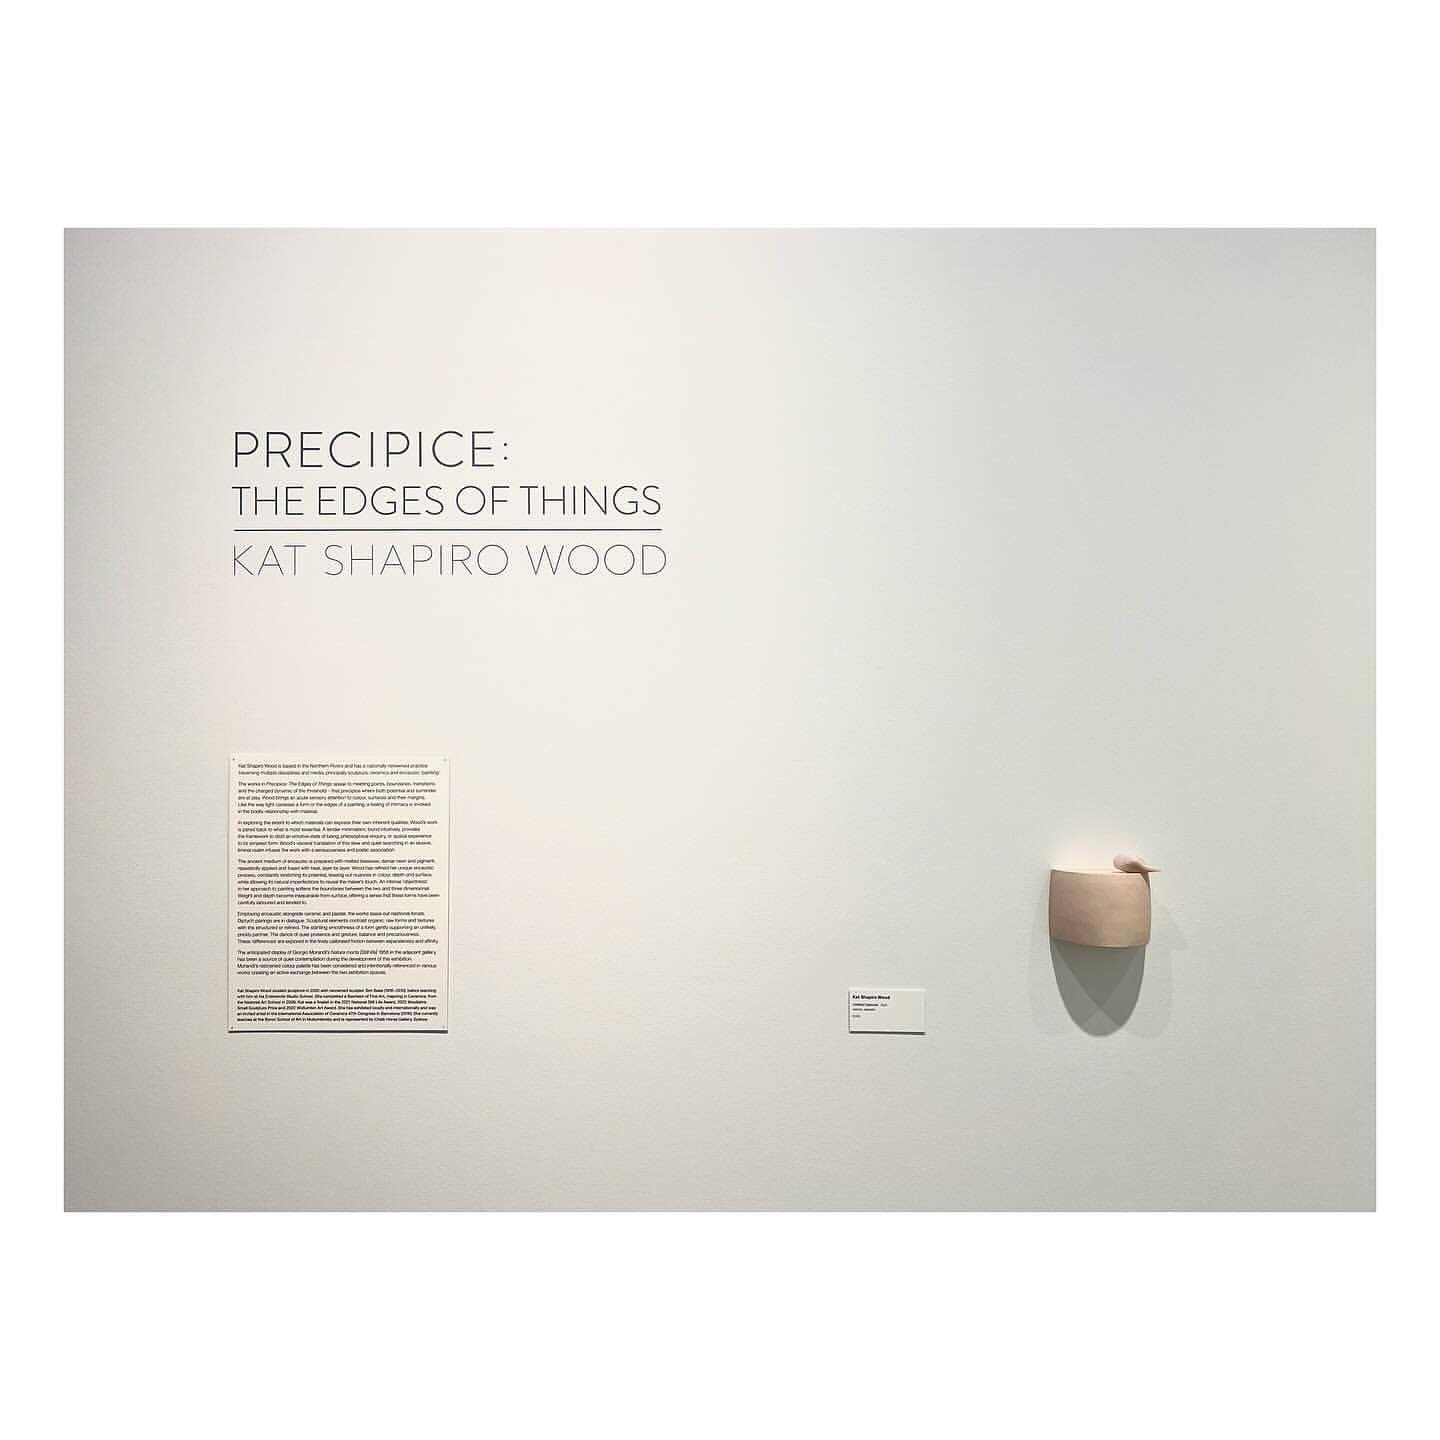 This Saturday @tweedregionalgallery Kat Shapiro Wood will be in conversation with Amber Wallis as they explore Kat&rsquo;s practice and her exhibition, &ldquo;Precipice: The Edges of Things.&rdquo;

When: Sunday, May 12th, 2024

Time: 2:00 pm - 3:00 